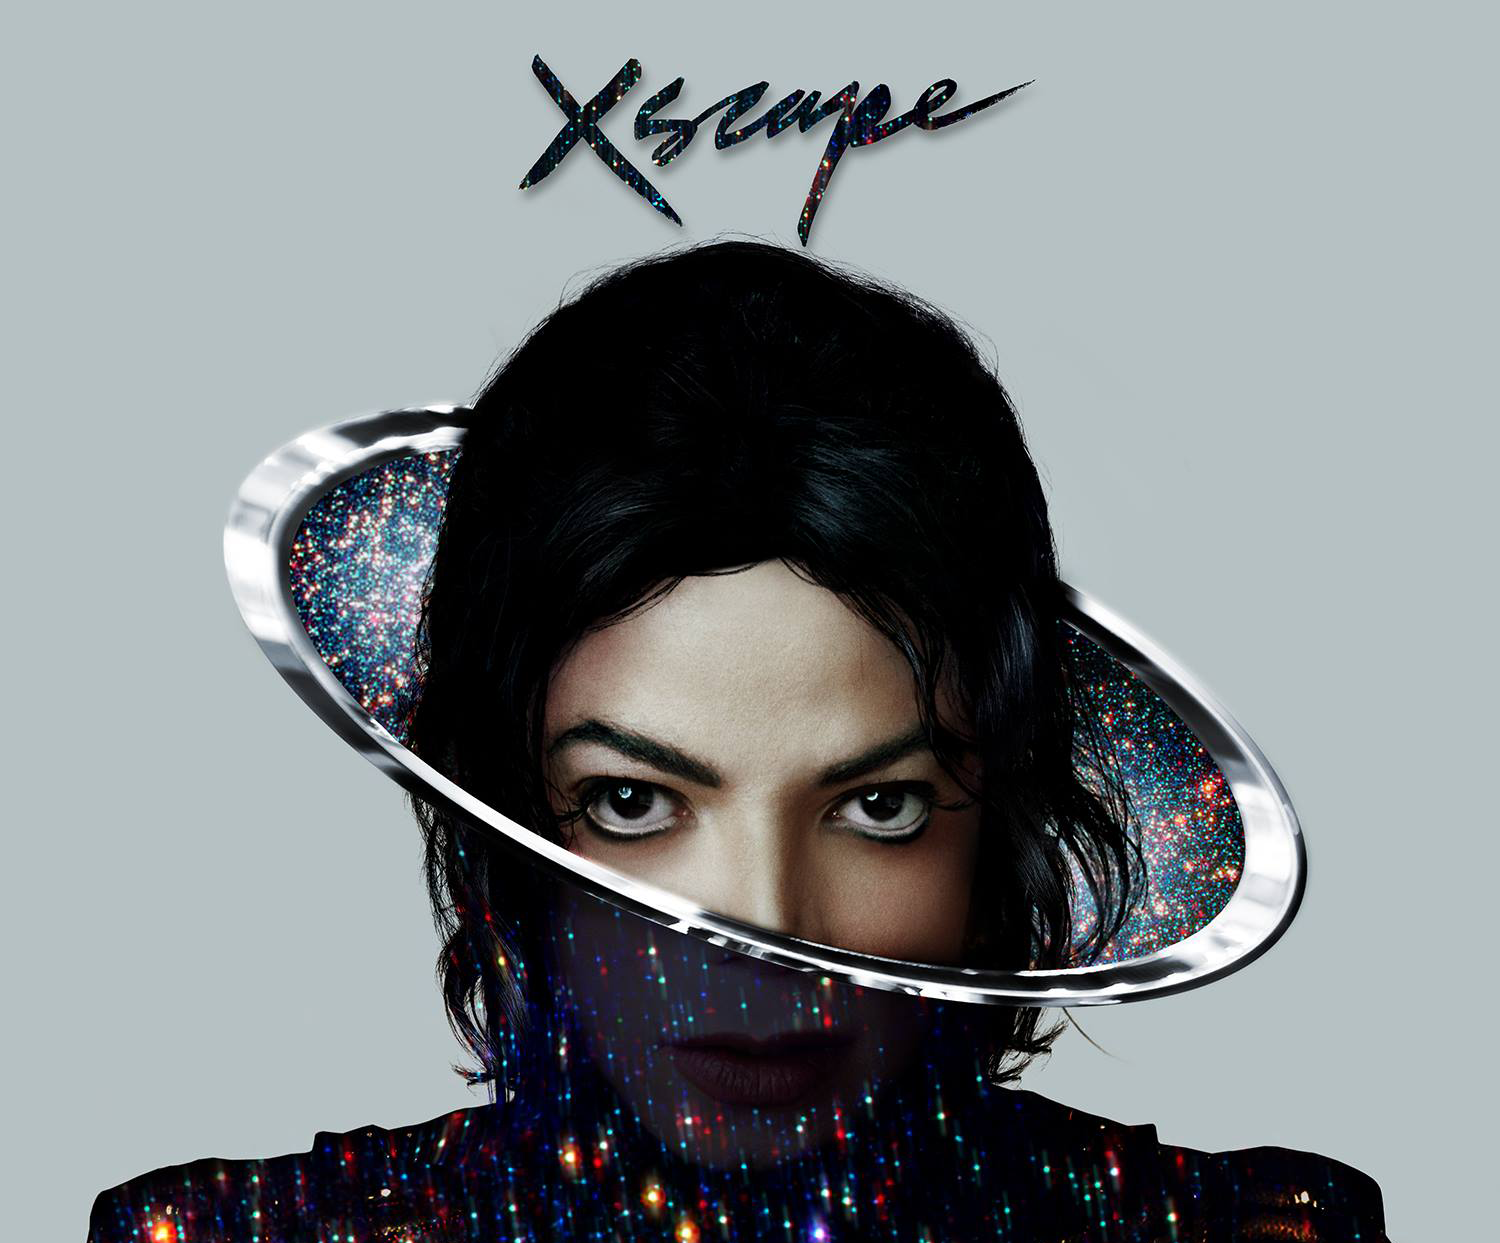 New Michael Jackson Album, XSCAPE, Set For Release This Year